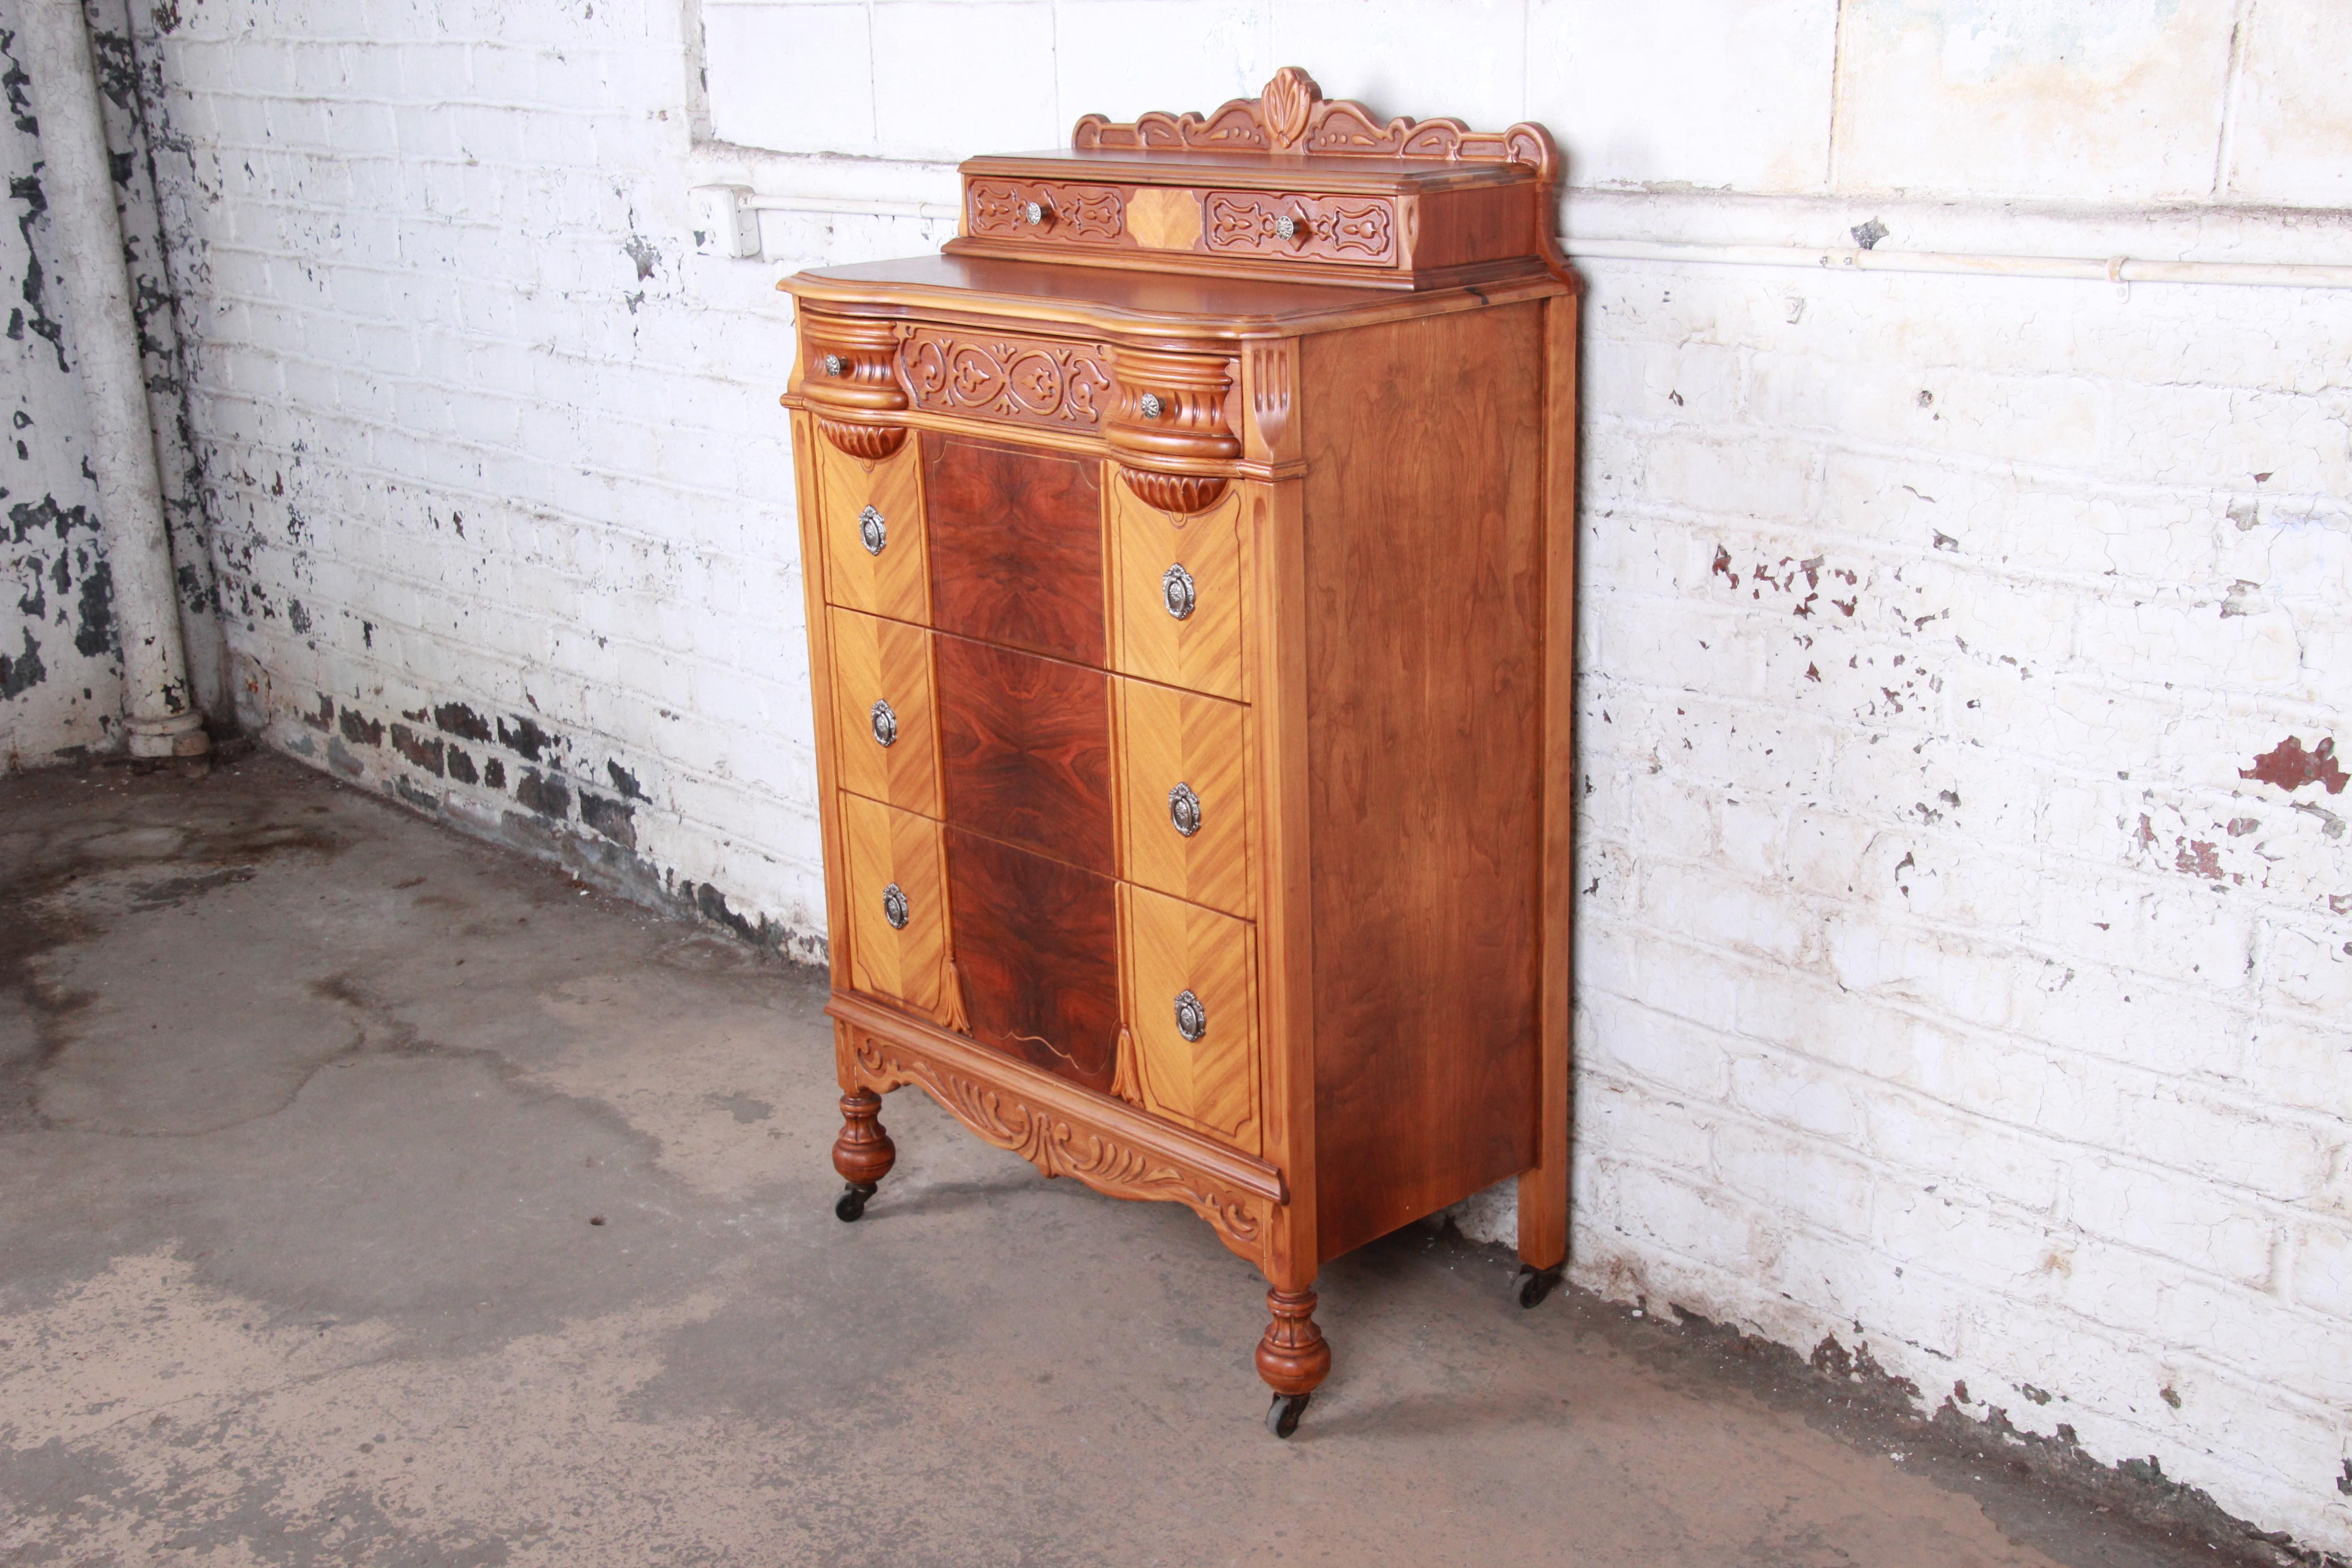 A gorgeous Art Deco ornate carved walnut highboy dresser

USA, 1930s

Carved walnut and book-matched burled walnut drawer fronts

Measures: 34.5